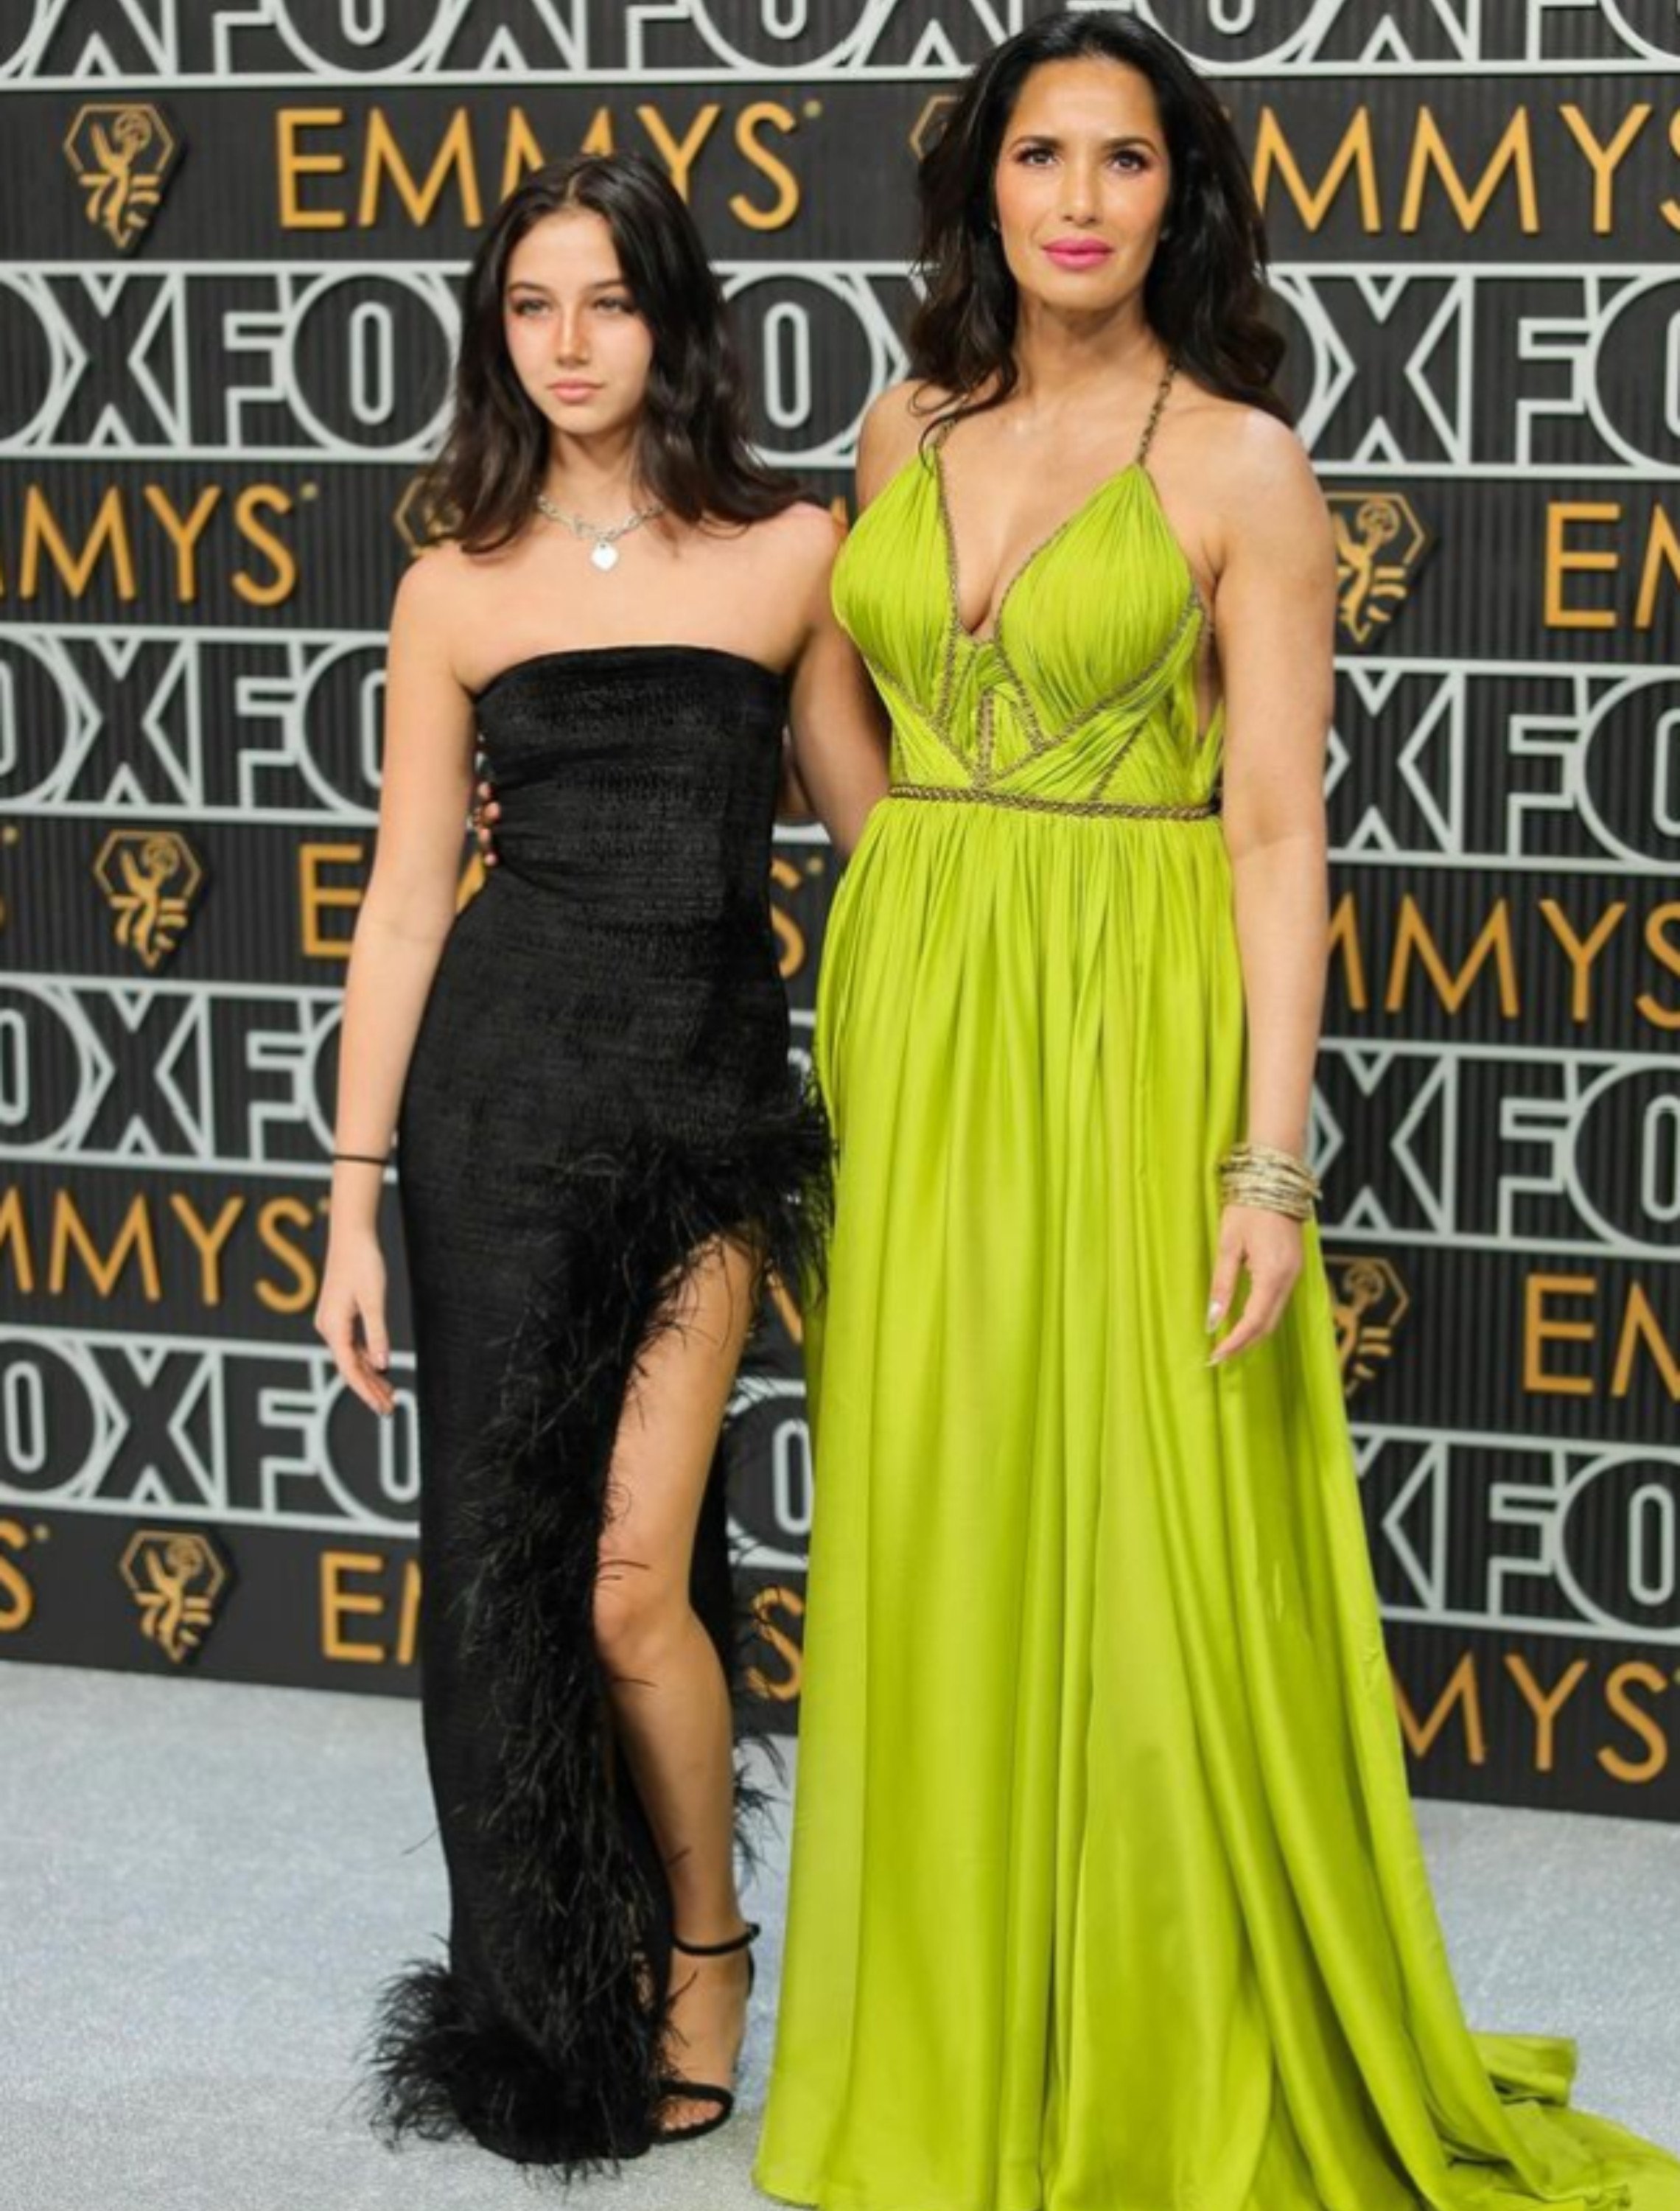 Krishna and Padma Lakshmi made a glam mother-daughter duo at the recent Emmy Awards. Photo: @justjared/Instagram 